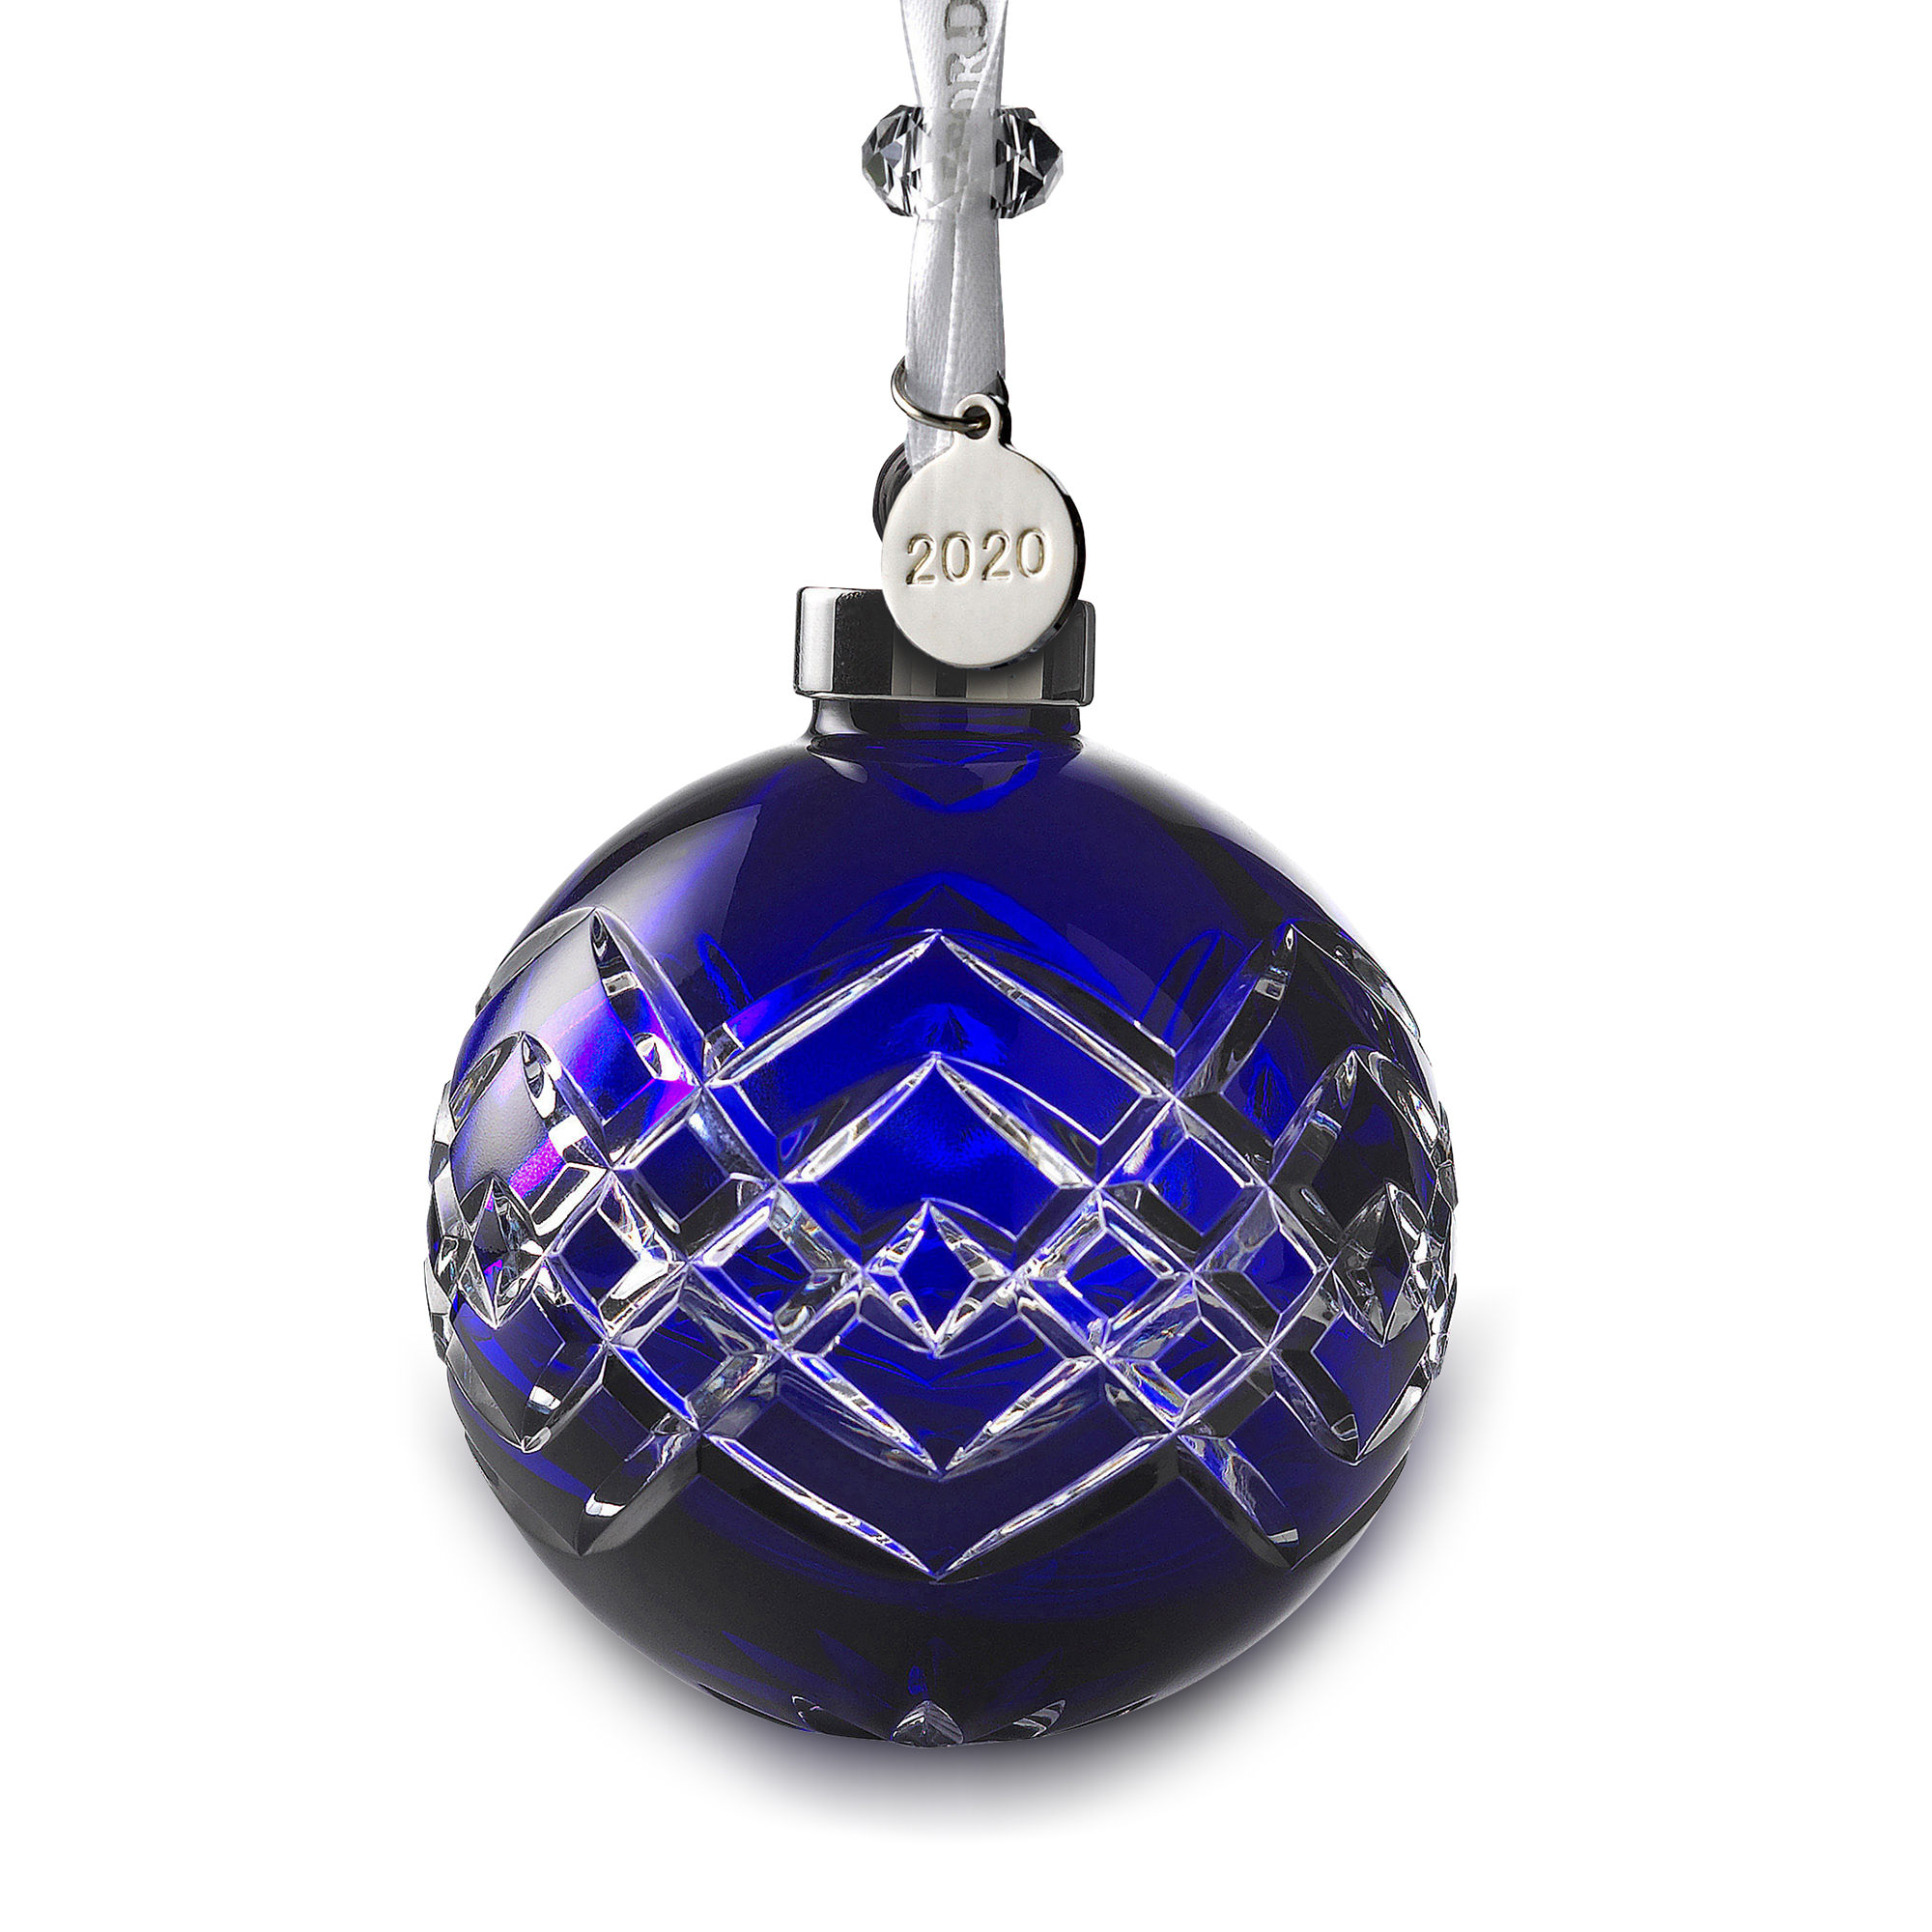 Waterford Crystal 2020 Sapphire Ball Ornament | Ross-Simons